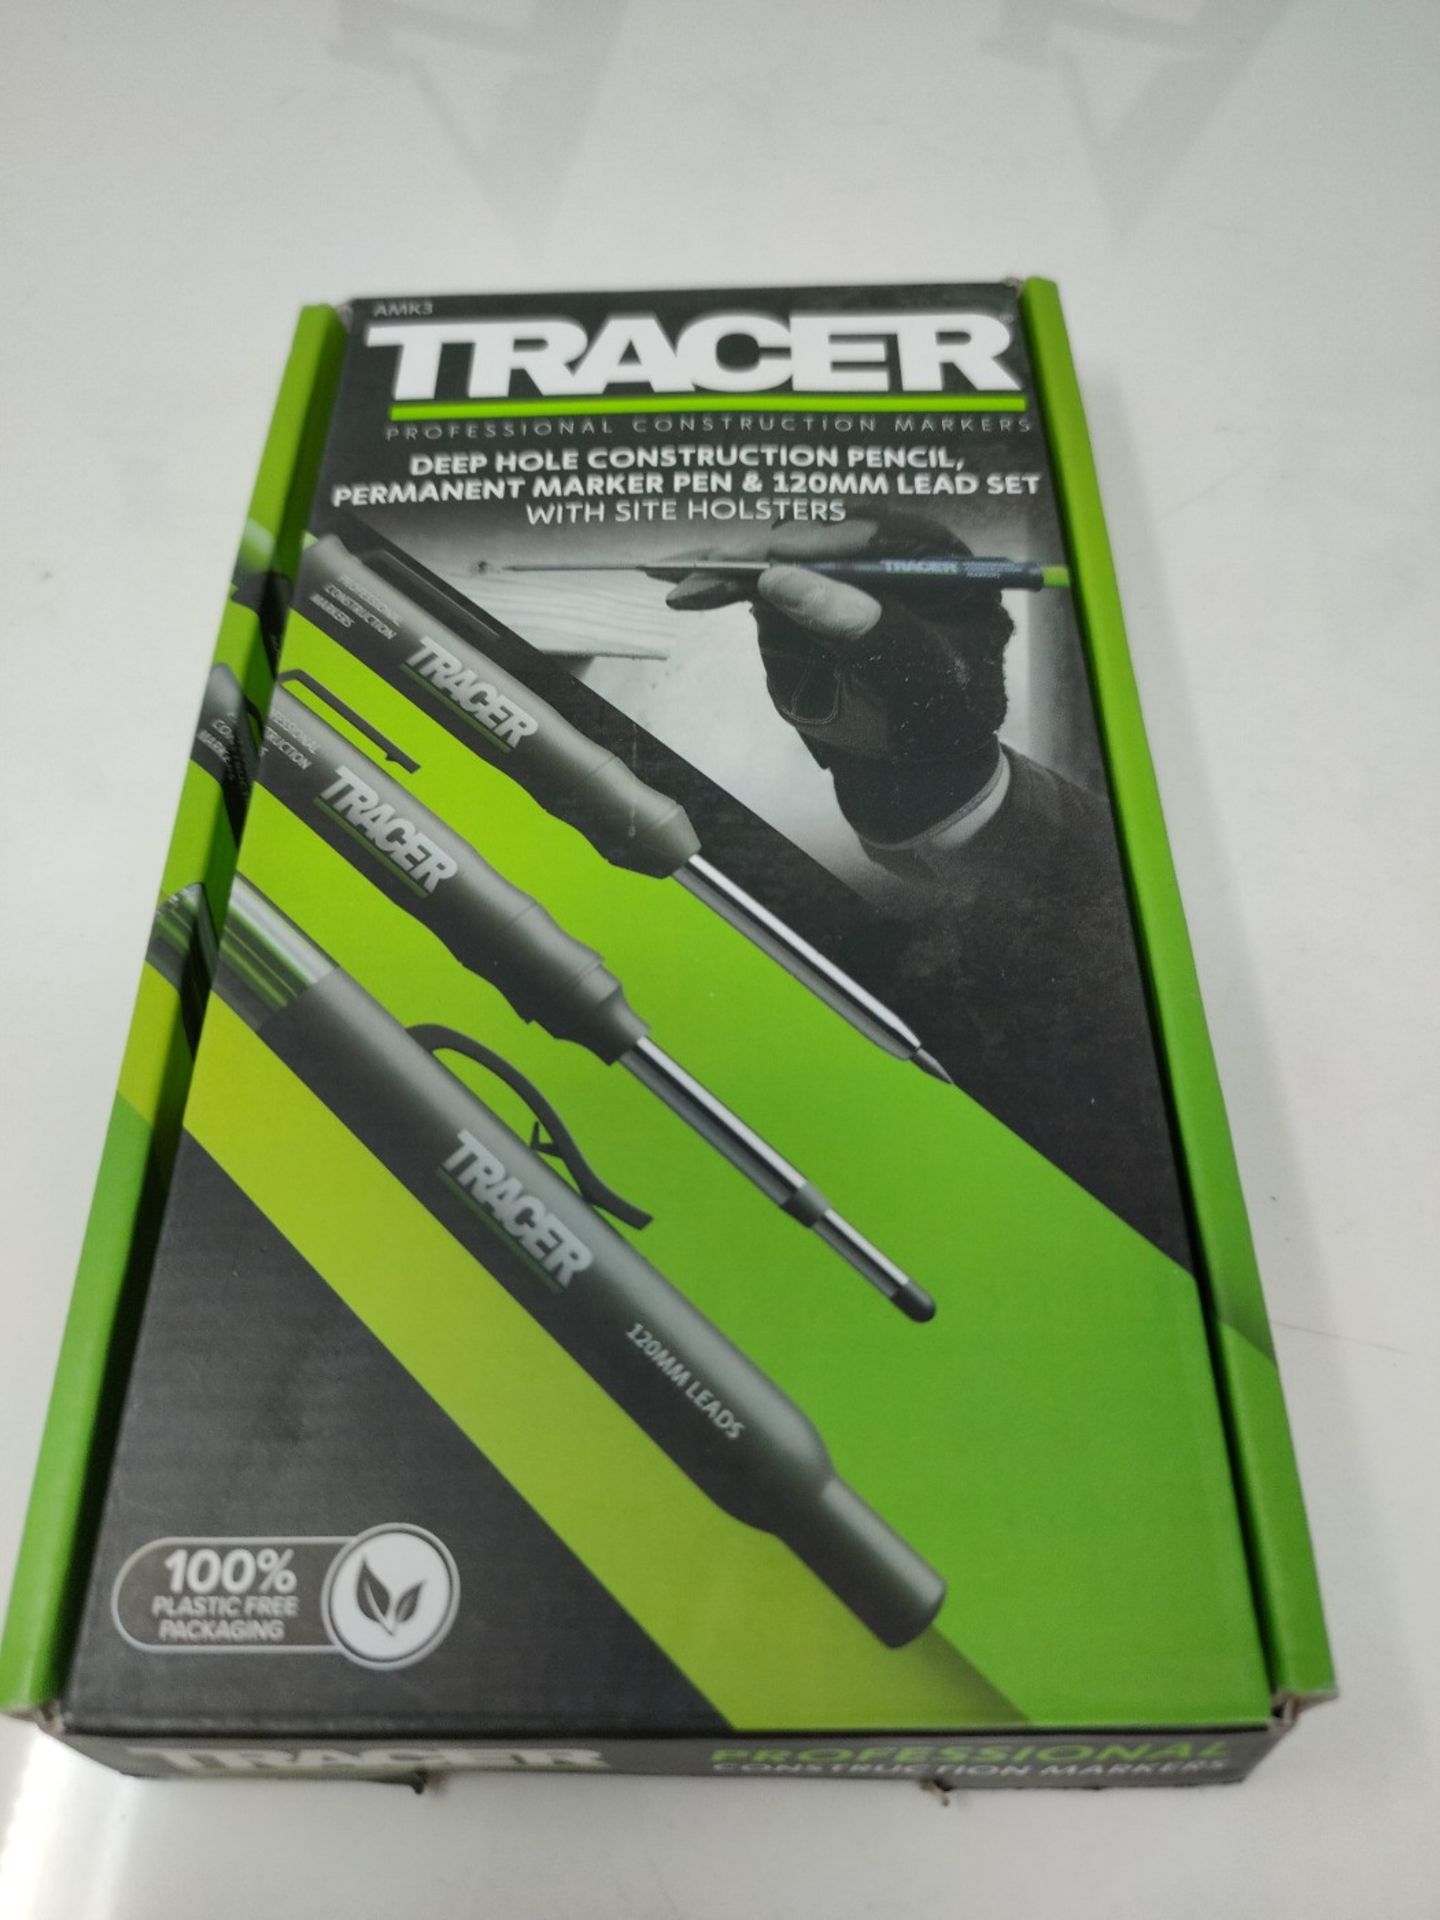 TRACER Complete Deep Hole Marking Kit - (including Double-Tipped Deep Hole Permanent M - Image 2 of 3